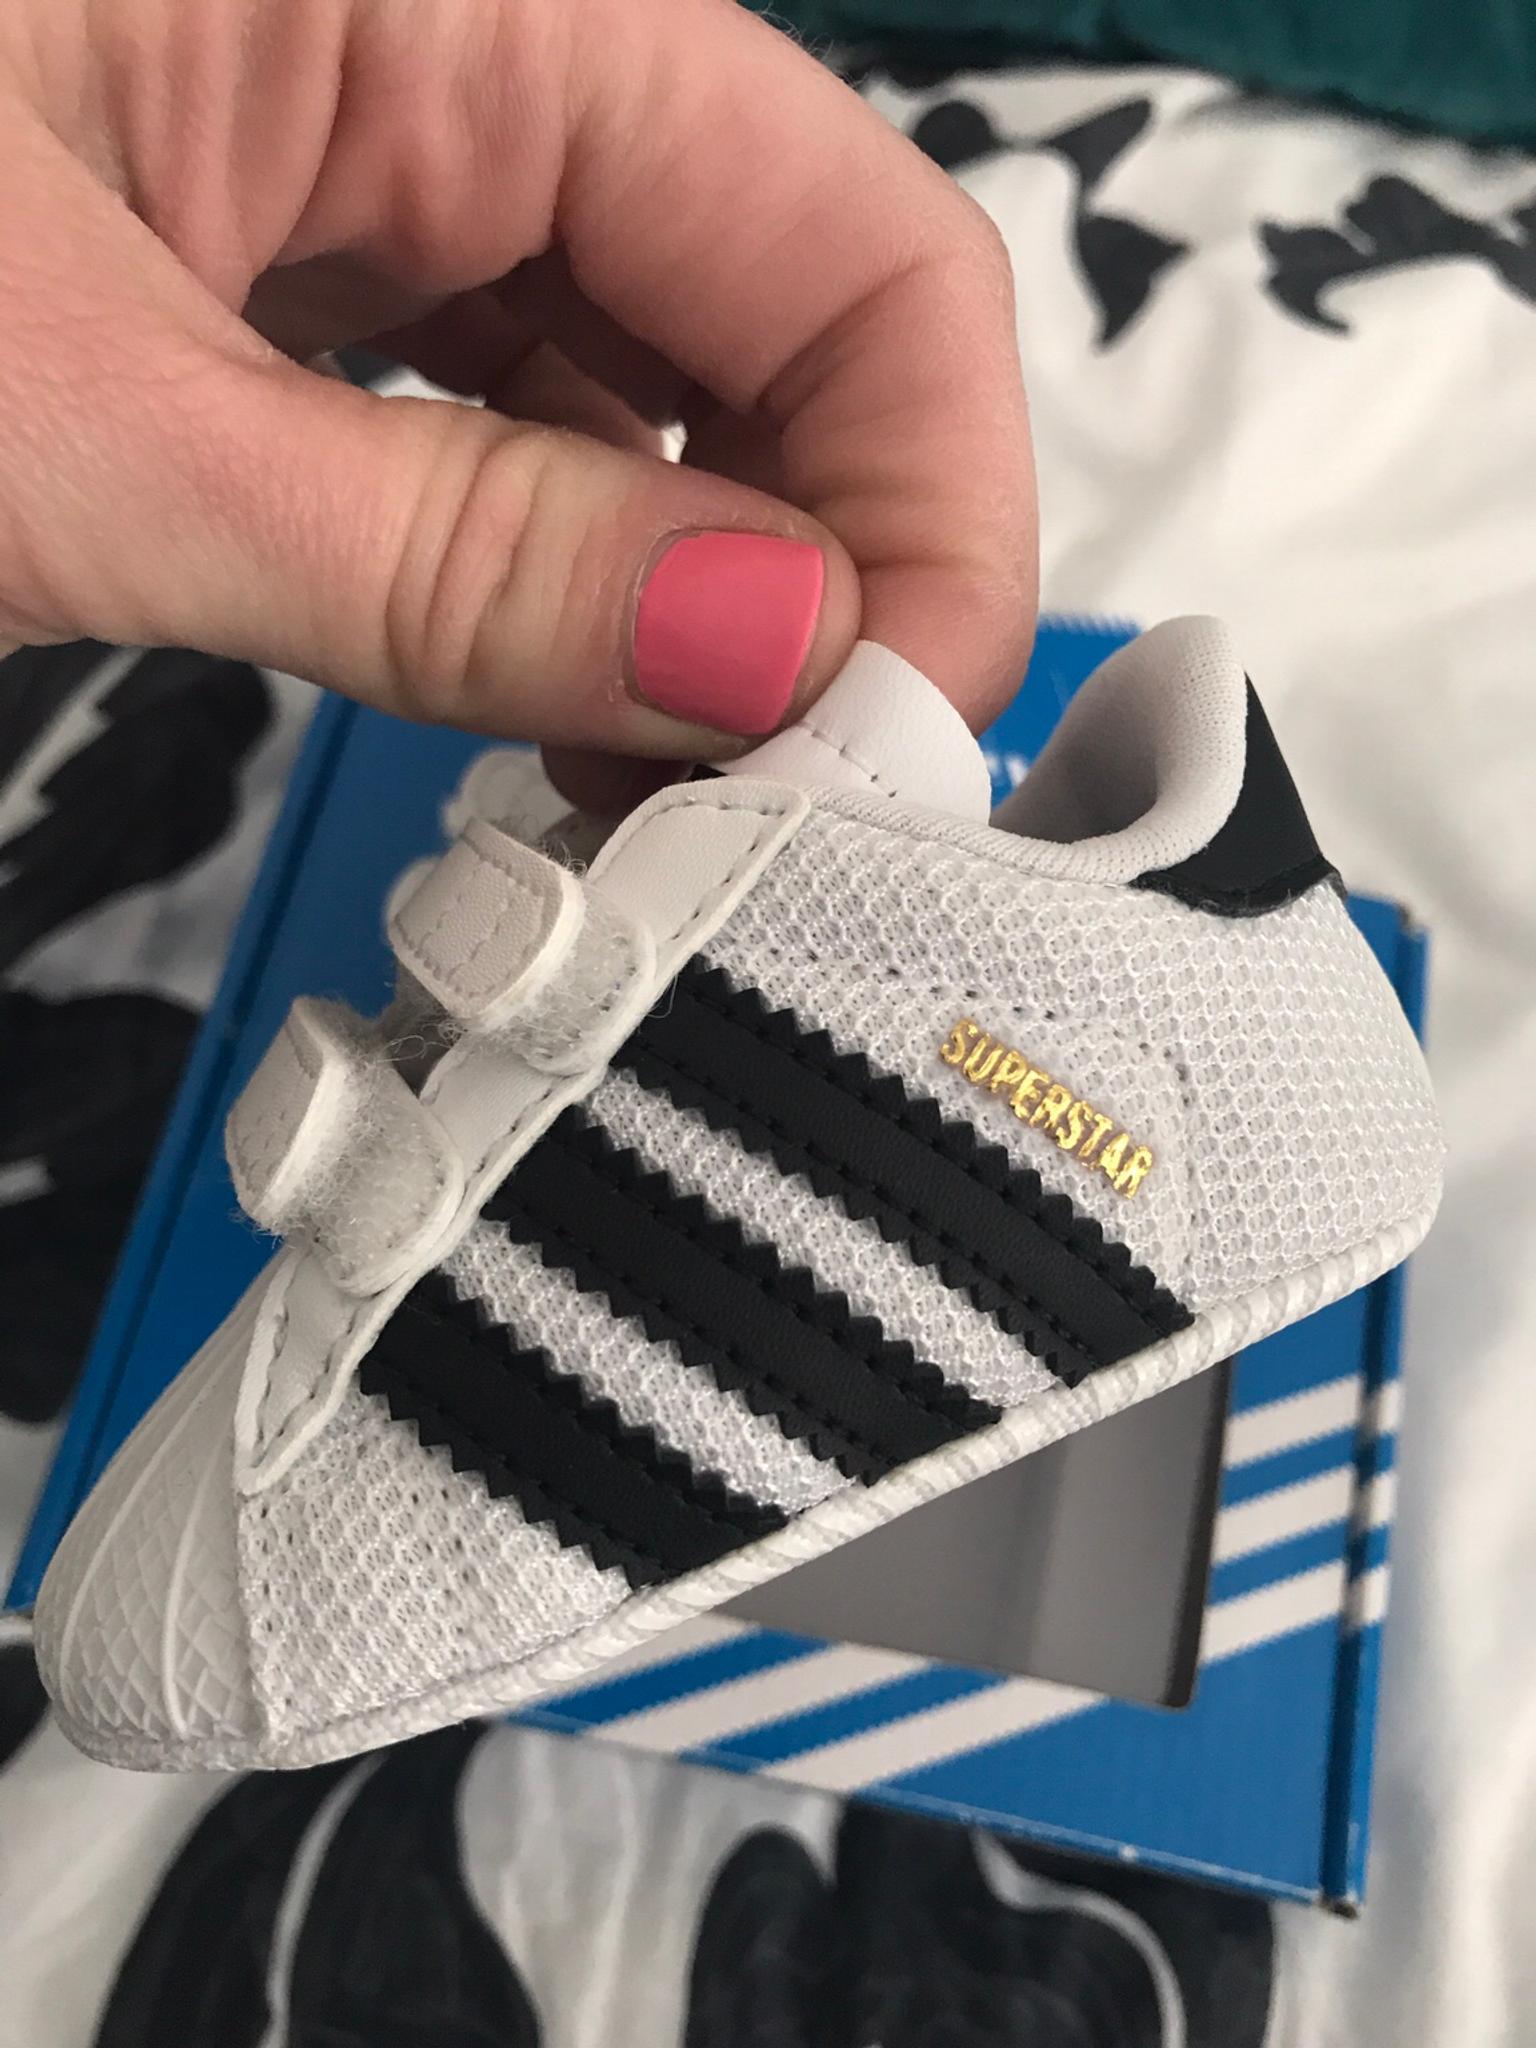 baby in adidas